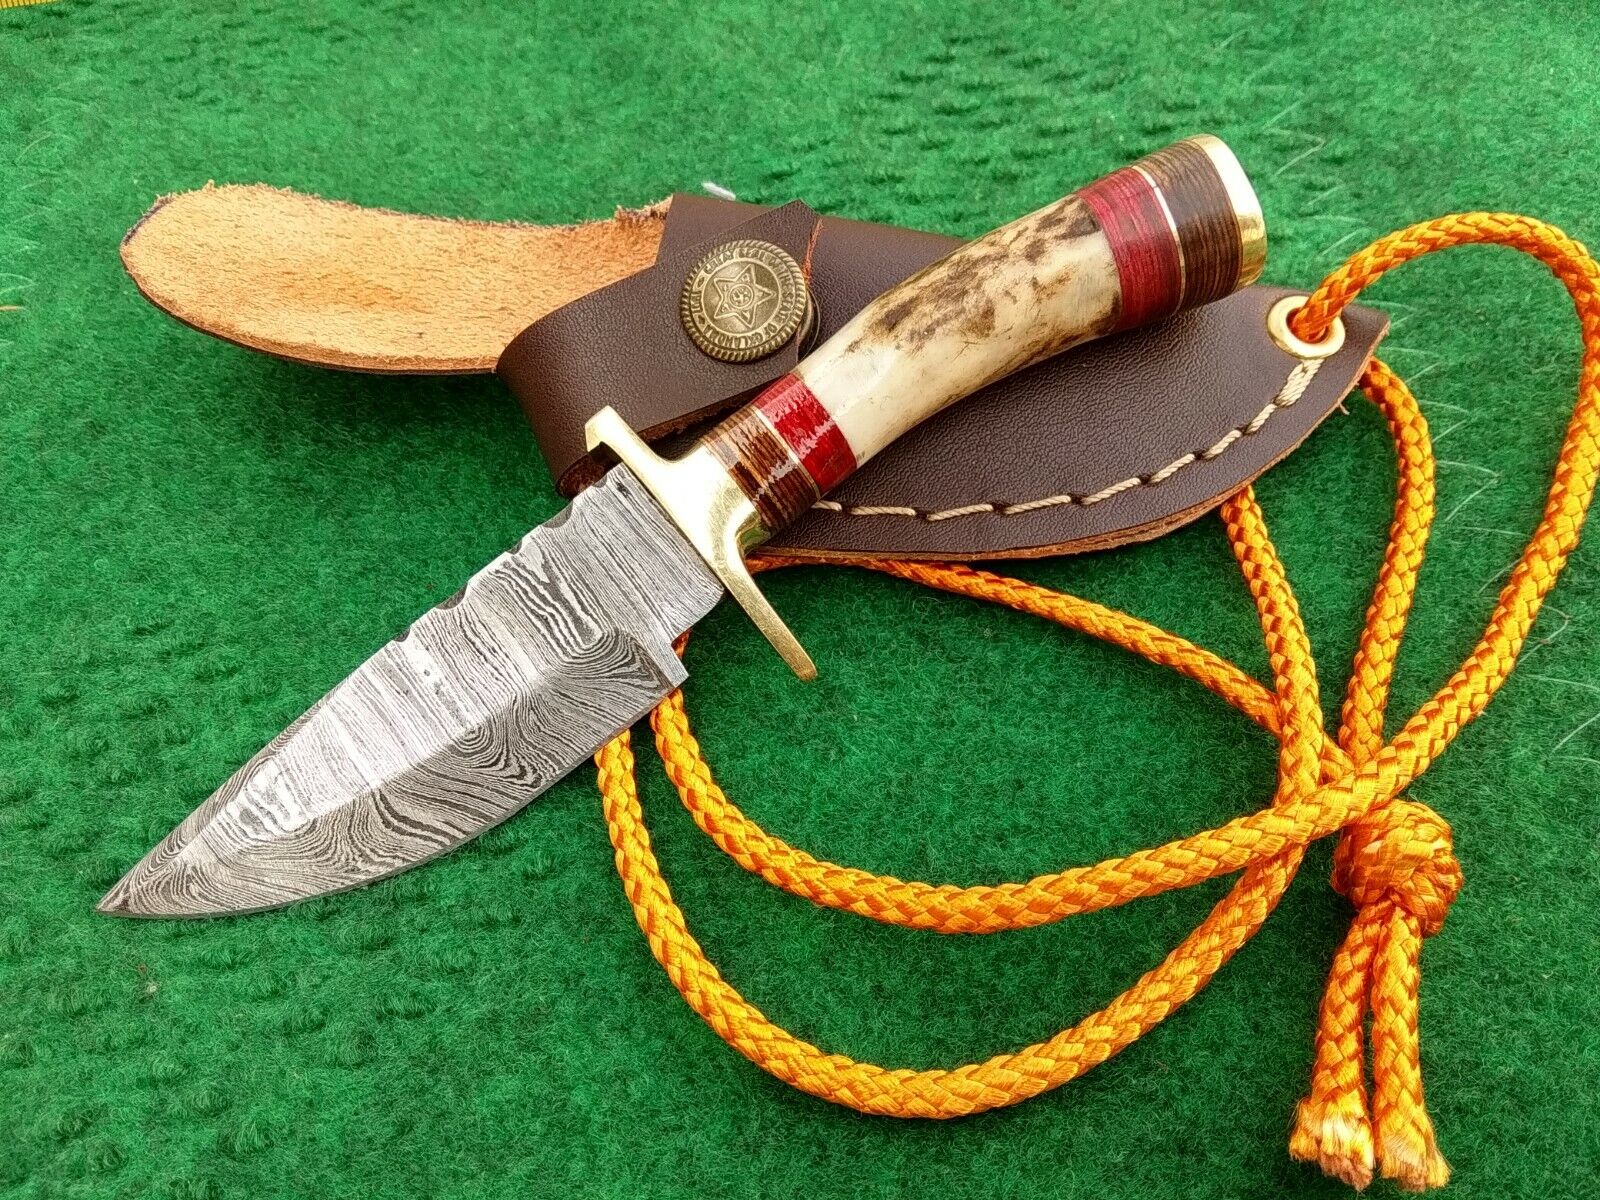 Antler Knife Hand Forged DAMASCUS Steel Hunting Skinner with Leather Sheath